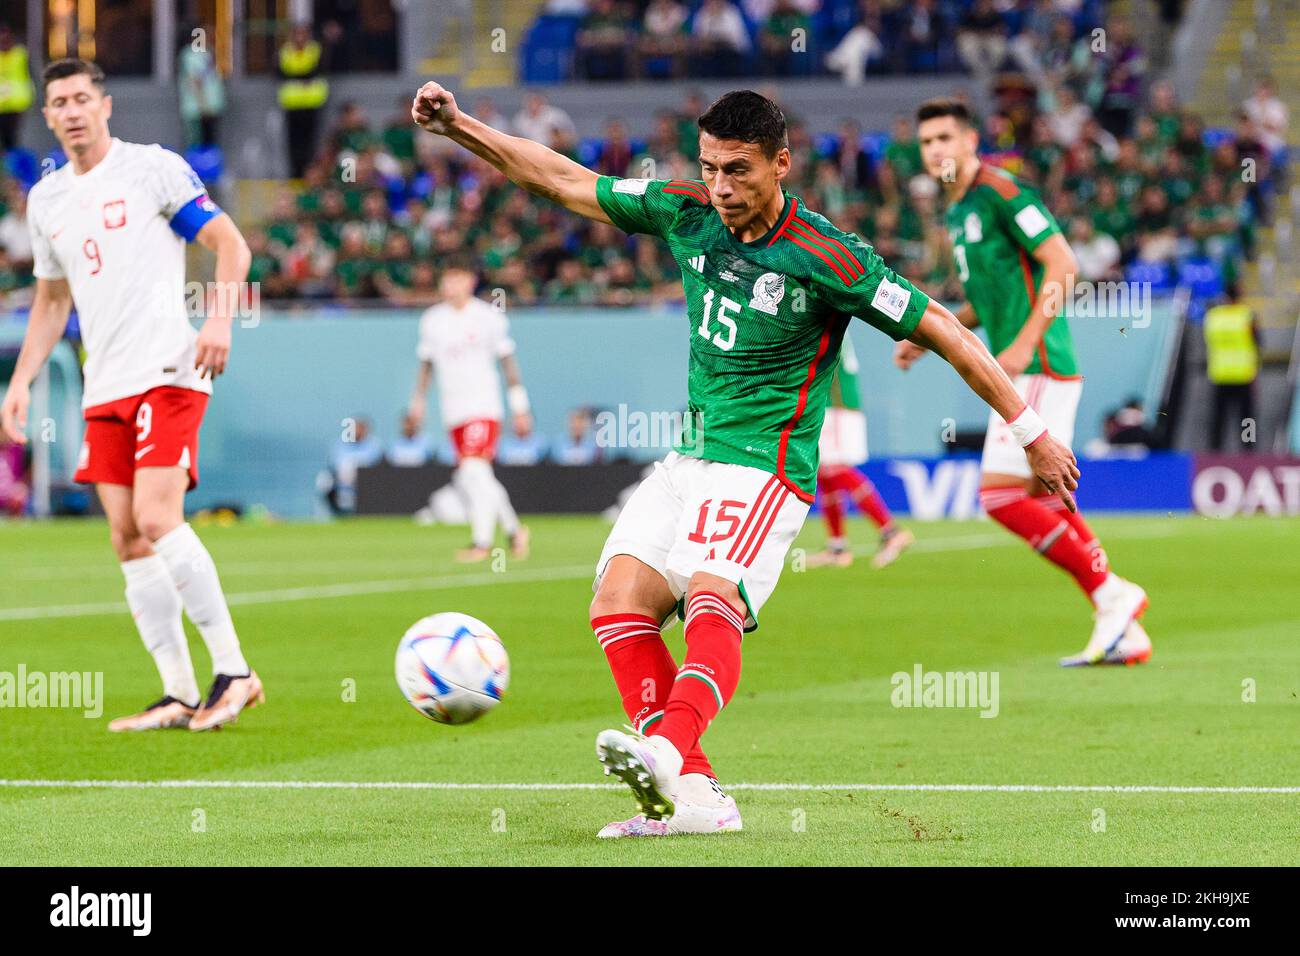 Doha, Qatar. 22nd Nov, 2022. Estadio 974 Hector Moreno of Mexico during a match between Mexico and Poland, valid for the group stage of the World Cup, held at Estadio 974 in Doha, Qatar. (Marcio Machado/SPP) Credit: SPP Sport Press Photo. /Alamy Live News Stock Photo